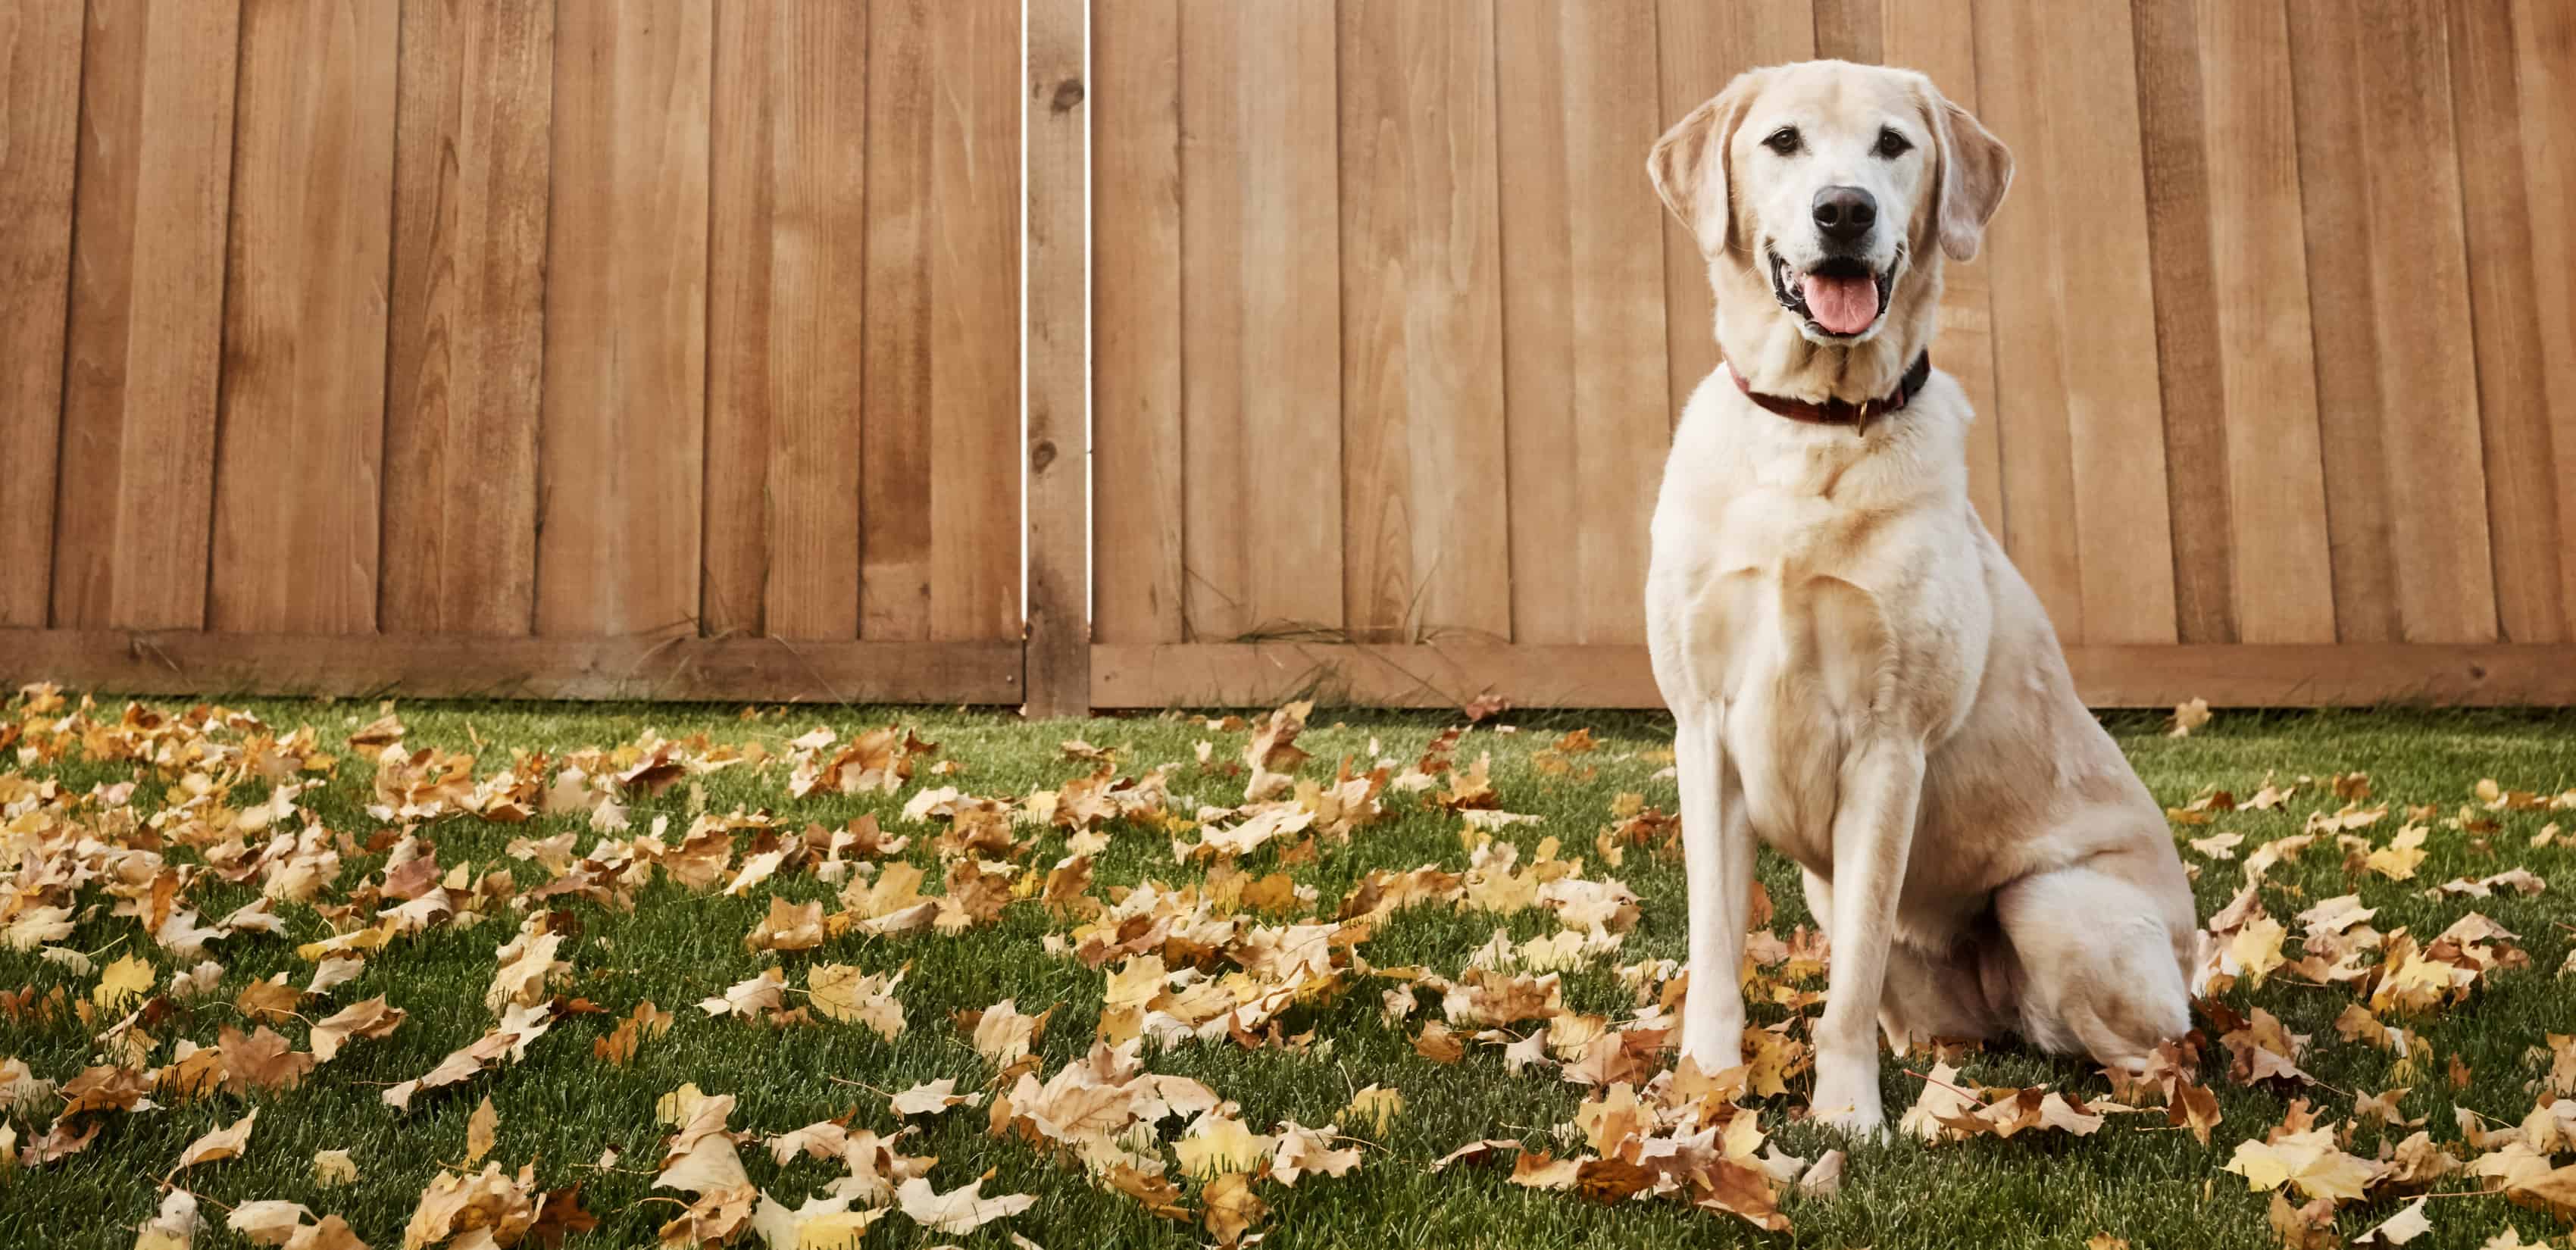 Yellow lab sitting in a yard in front of a fence among fallen leaves.